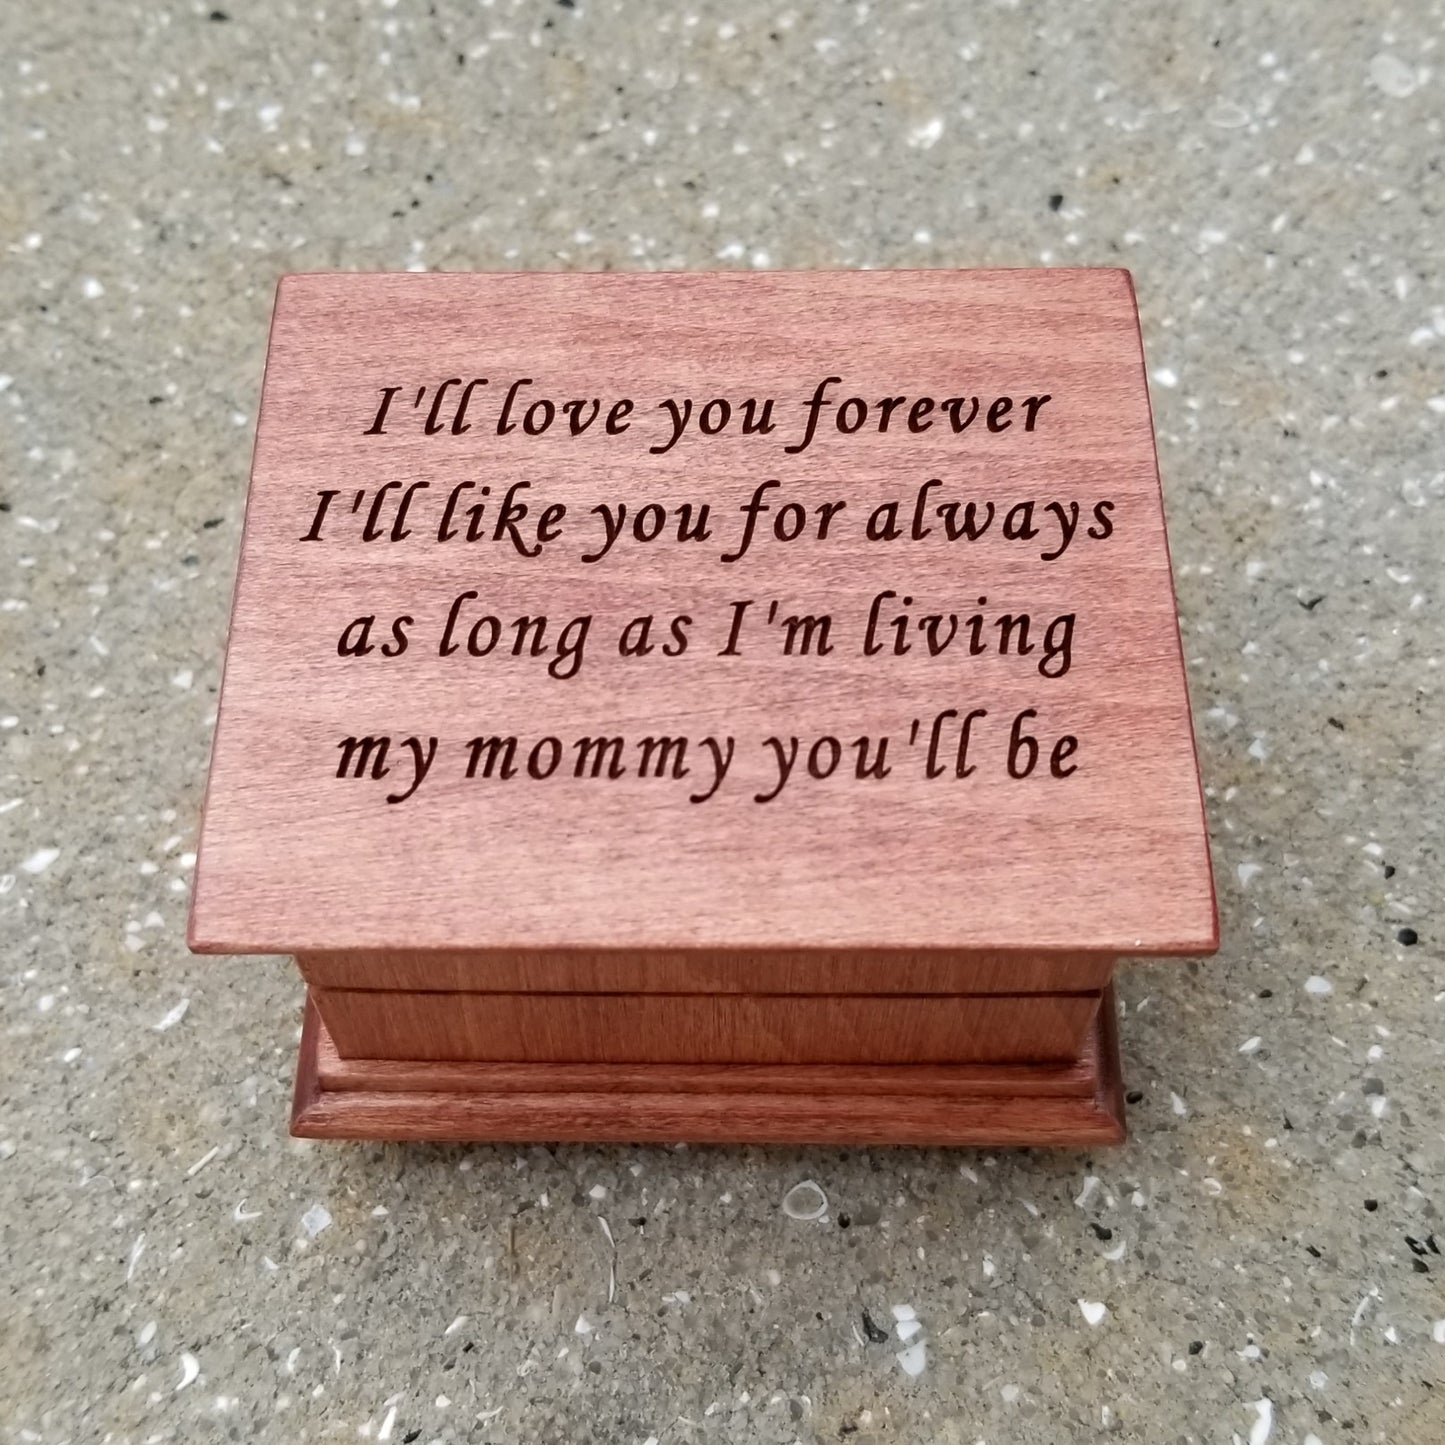 I'll love you forever I'll like you for always as long as I'm living my mommy you'll be engraved music box, choose color and song